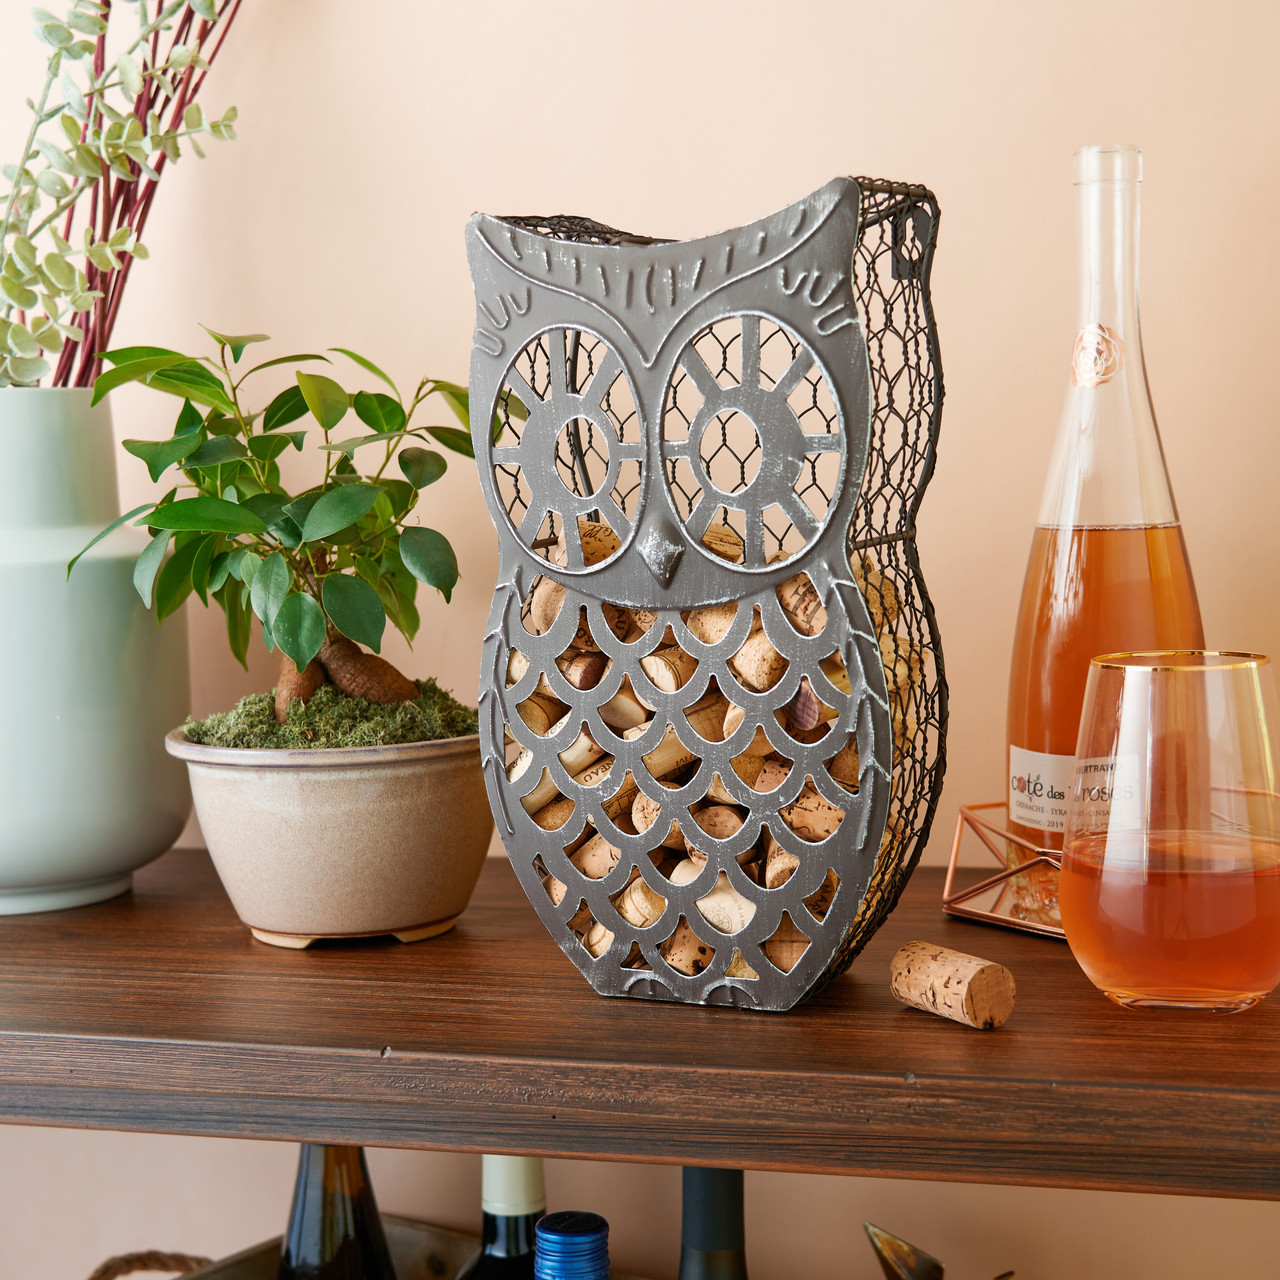 Wise Owl Cork Collector by Twine®